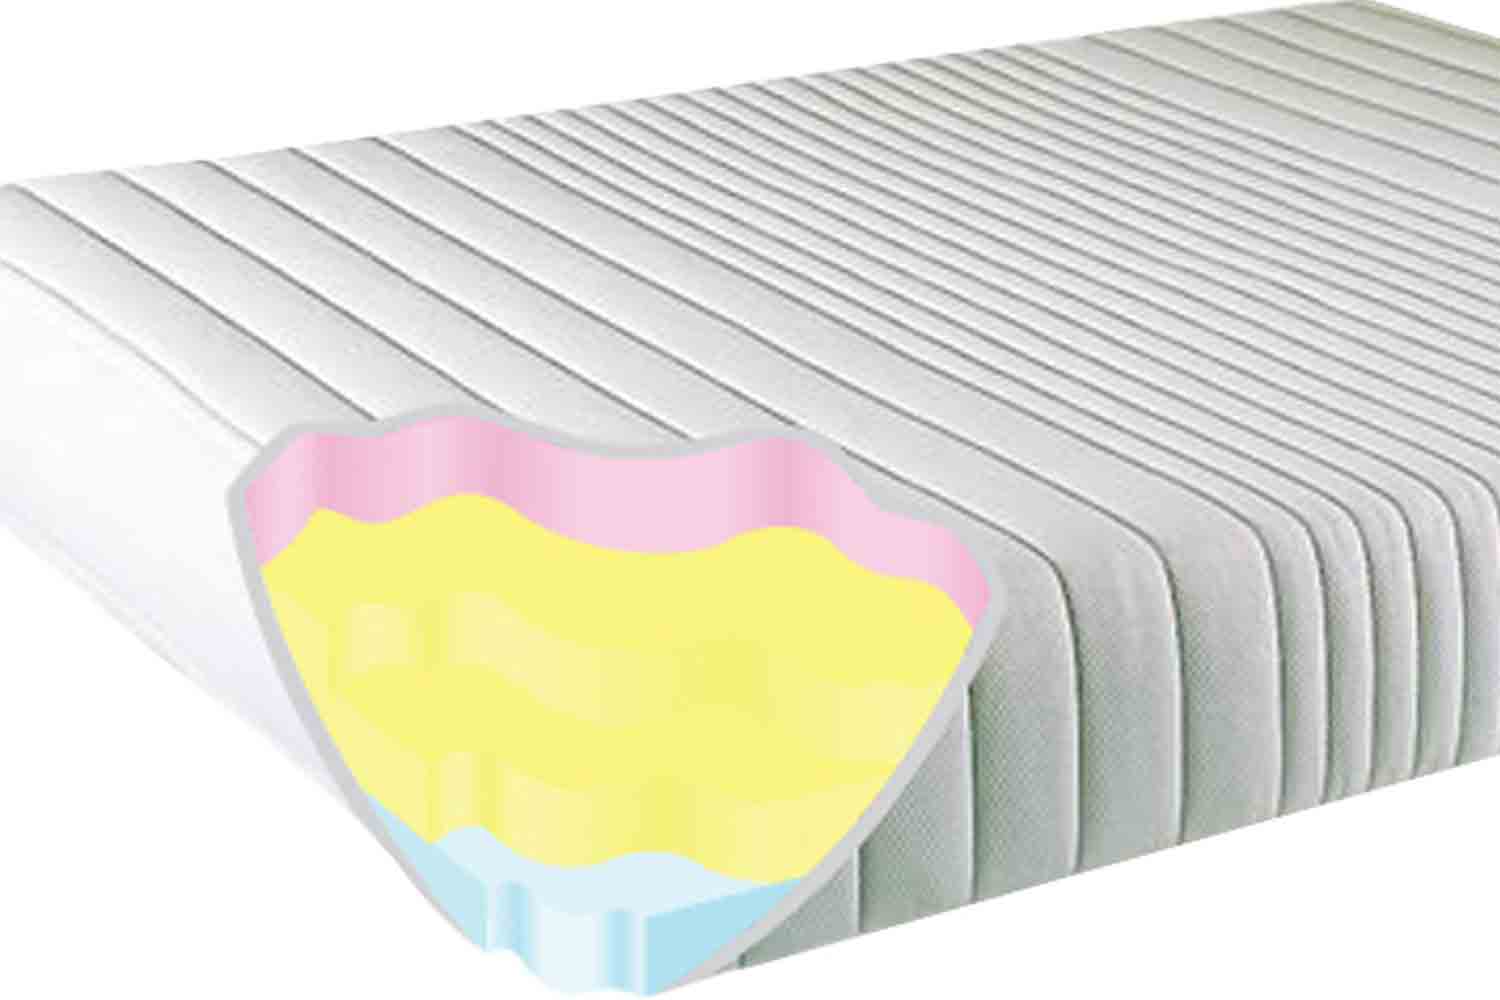 Memory Foam Mattress Made For Electric Adjustable Beds